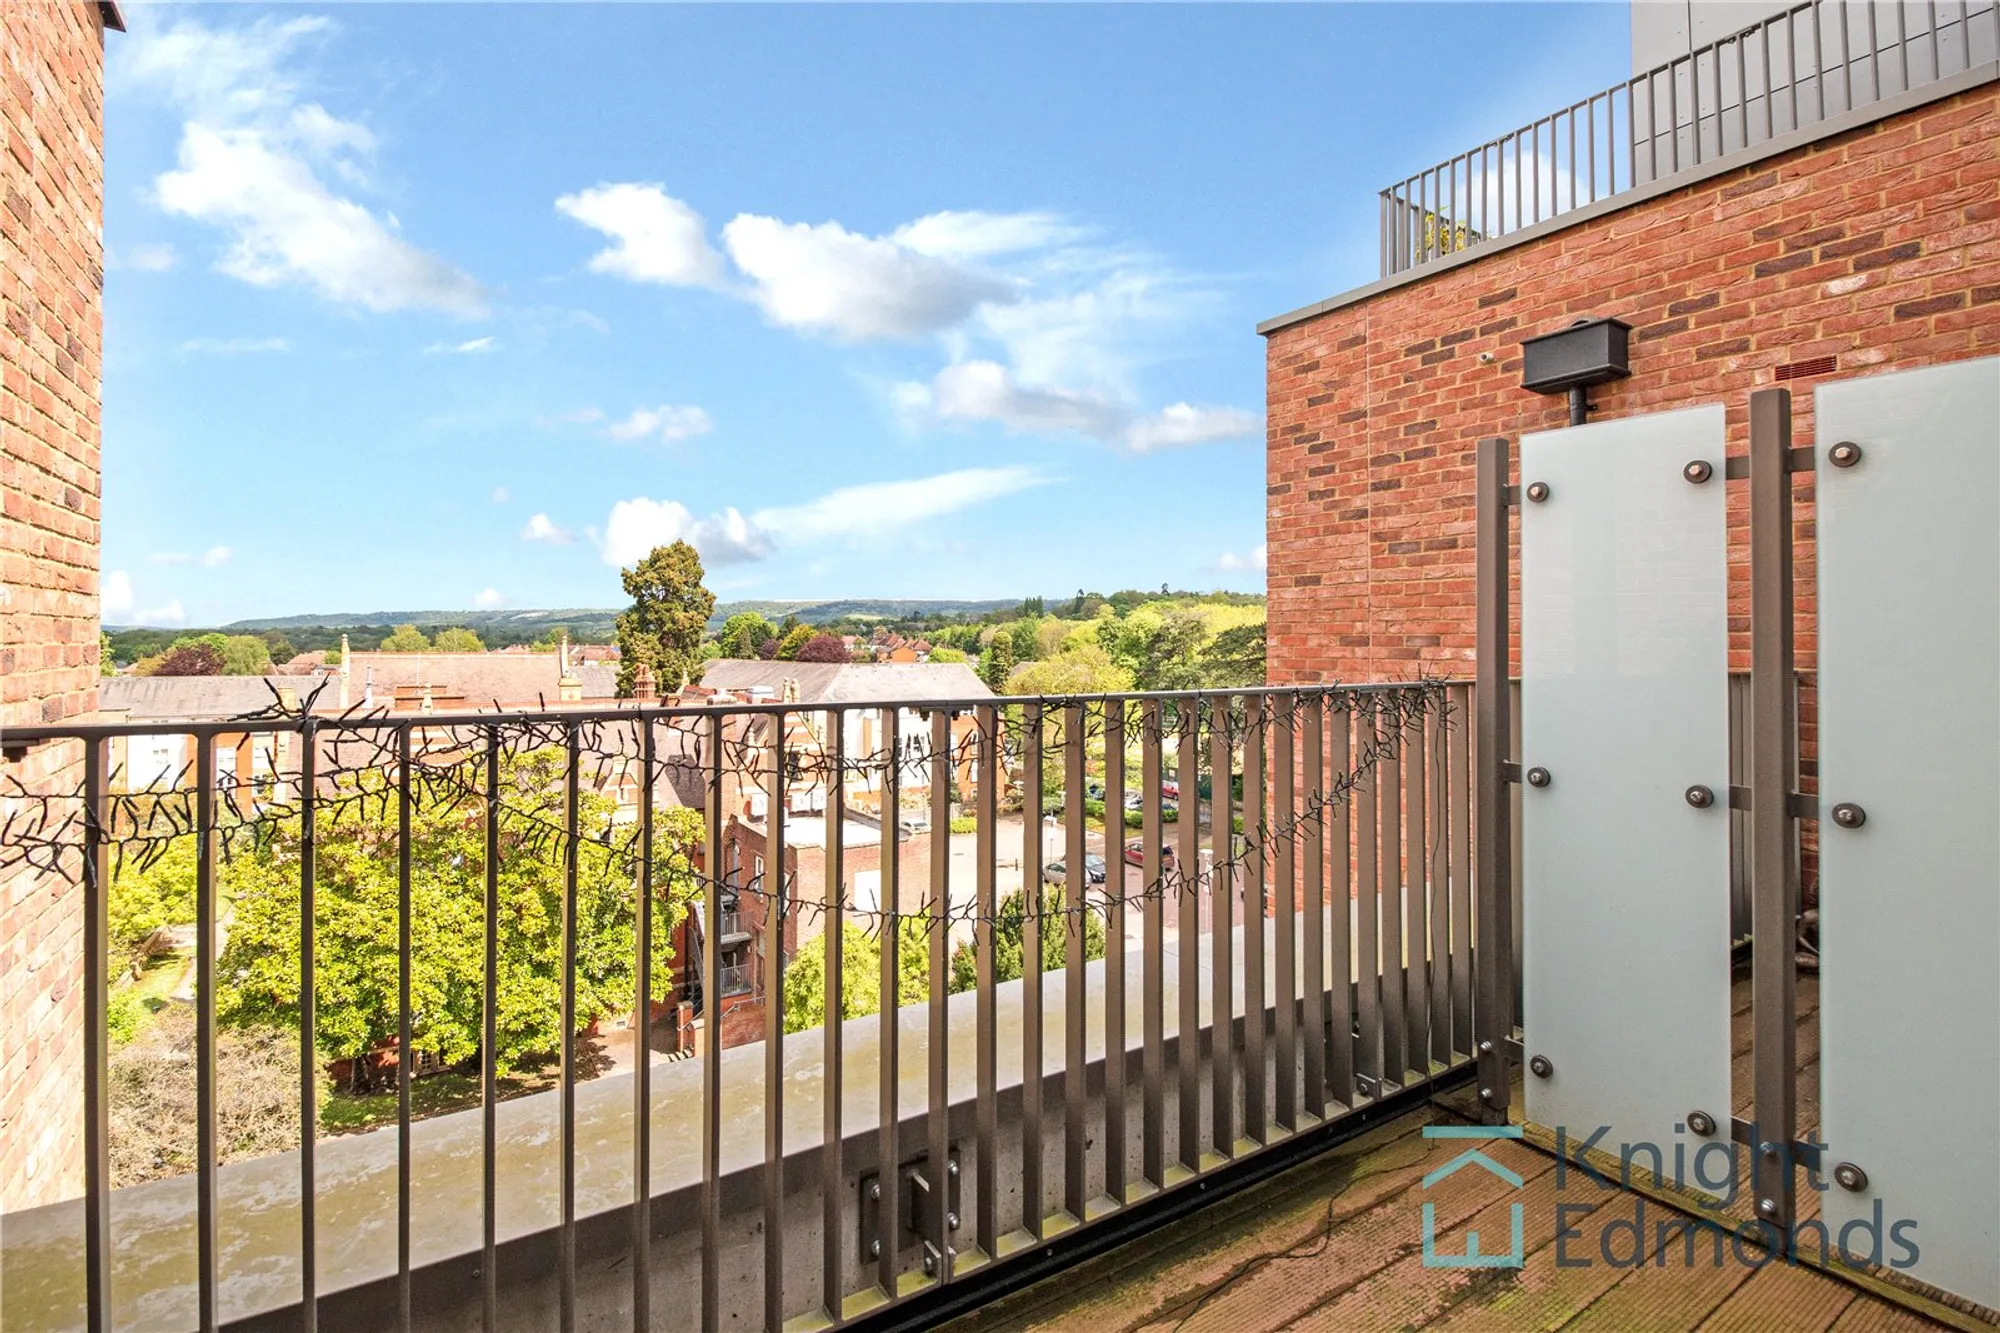 1 bed apartment for sale in Rosalind Drive, Maidstone, ME14